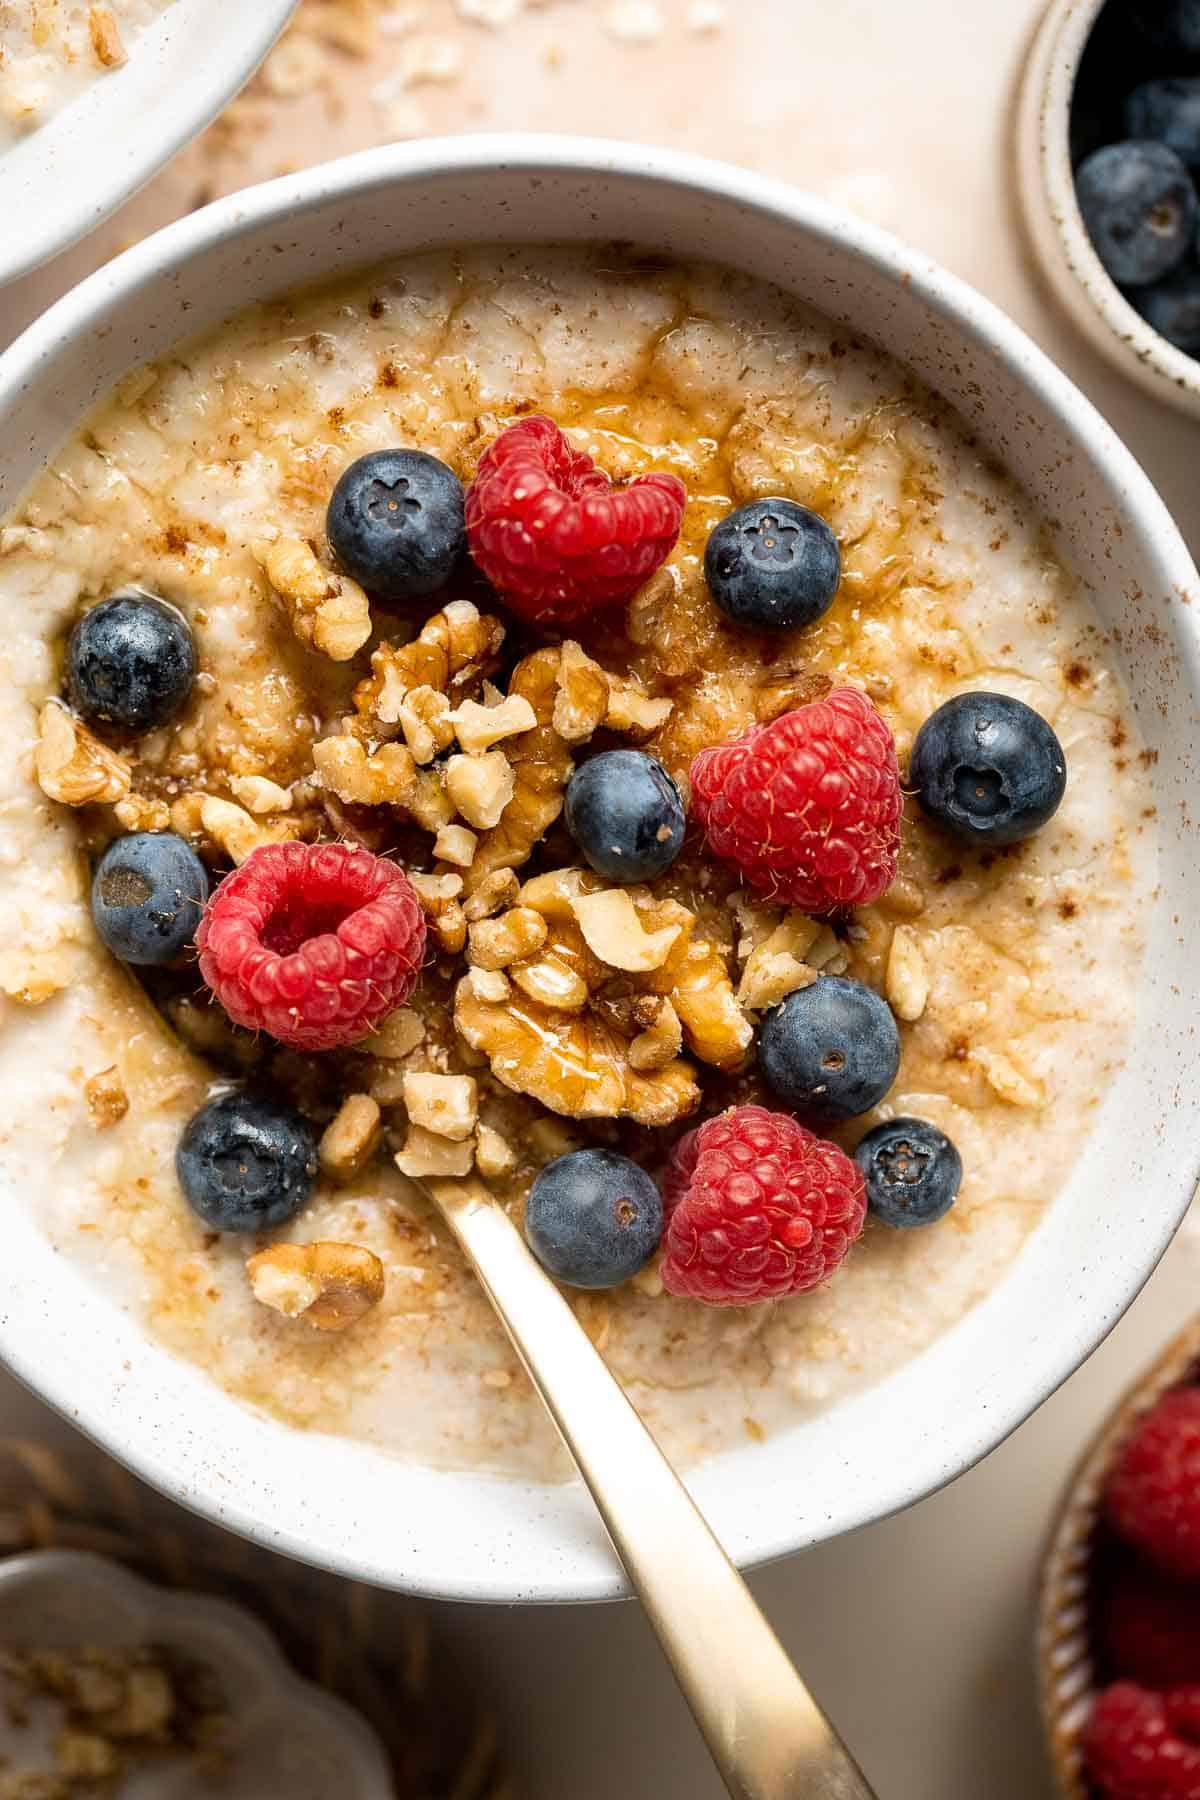 Oat Porridge is a healthy, delicious breakfast that's warm, comforting, cozy, and great for all ages. A quick easy recipe to warm you up on cold mornings. | aheadofthyme.com